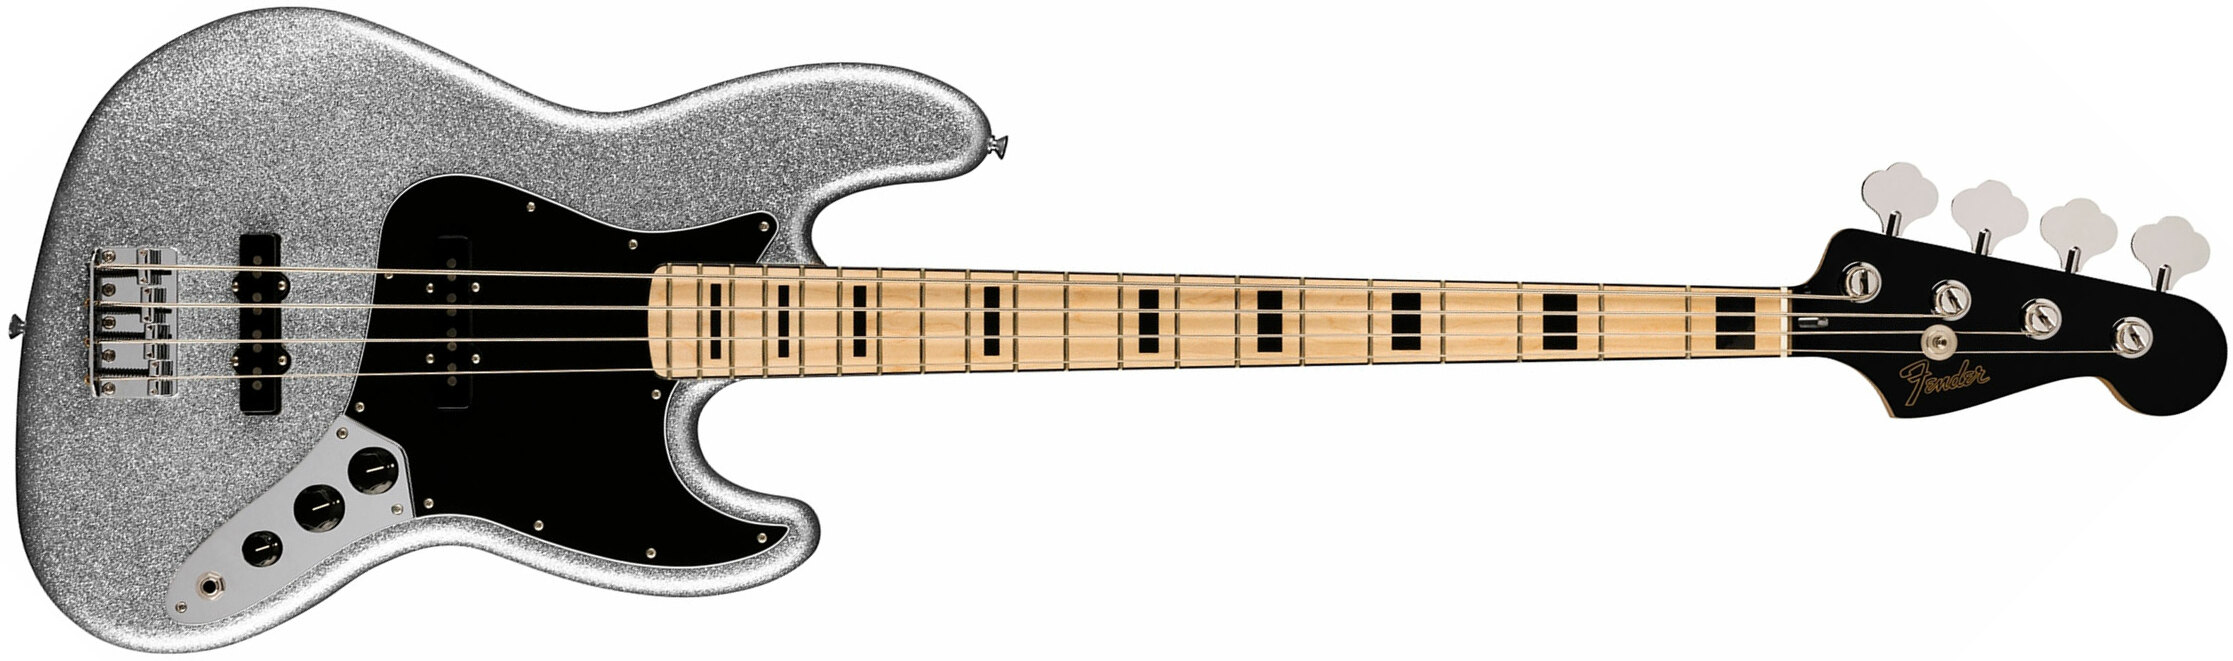 Fender Mikey Way Jazz Bass Ltd Signature Mex Mn - Silver Sparkle - Solid body electric bass - Main picture